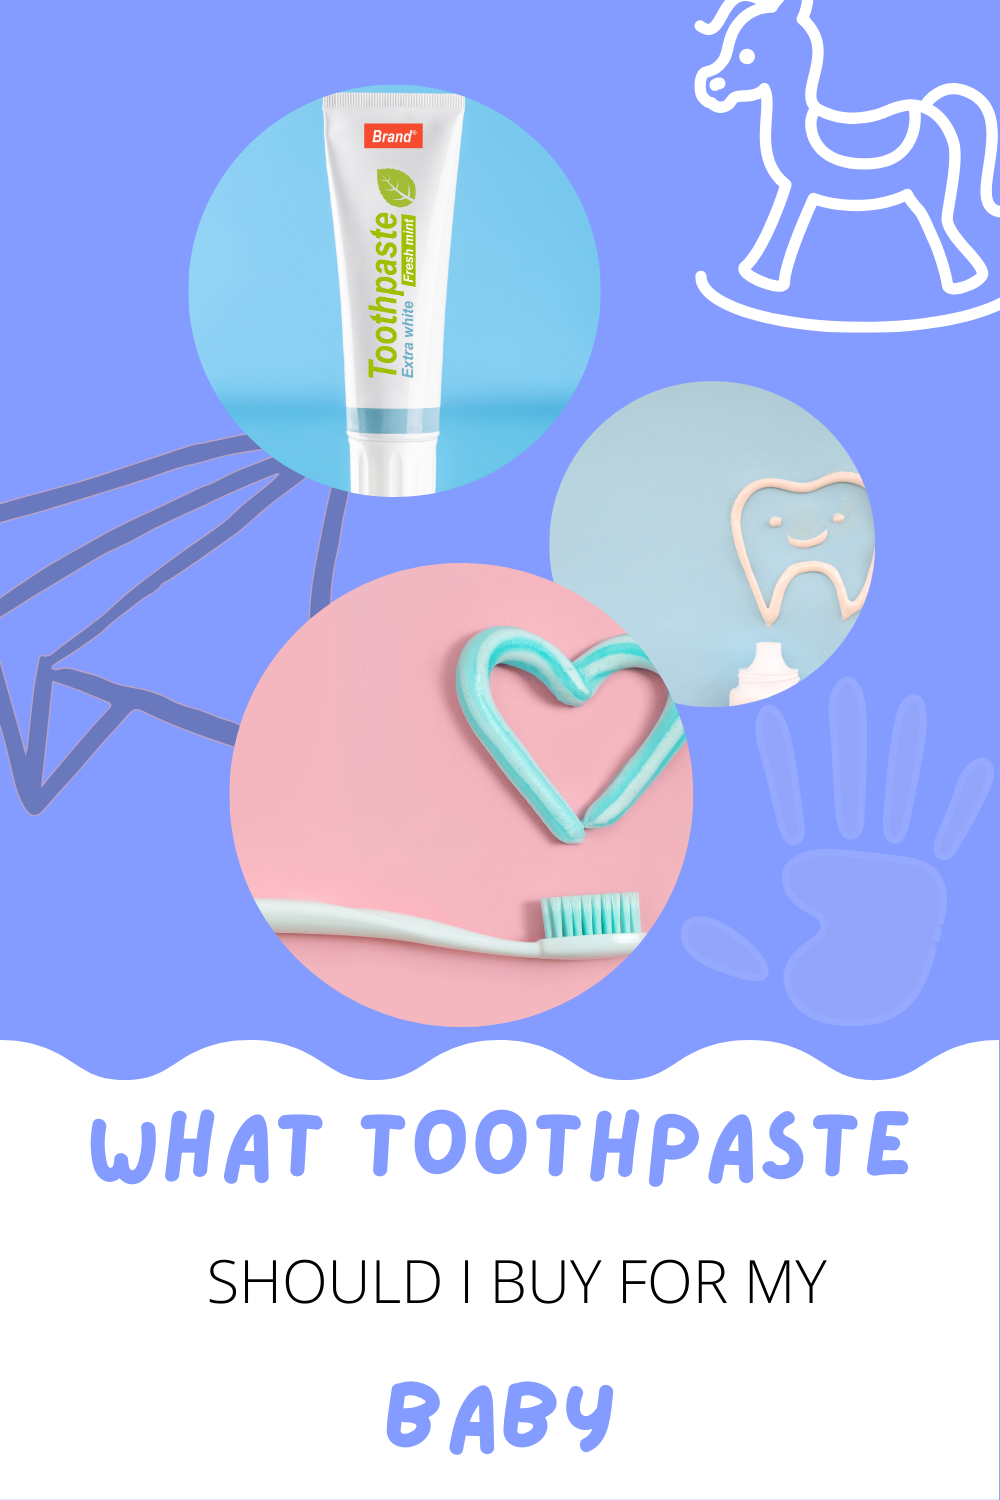 What toothpaste should i buy for my baby's teeth